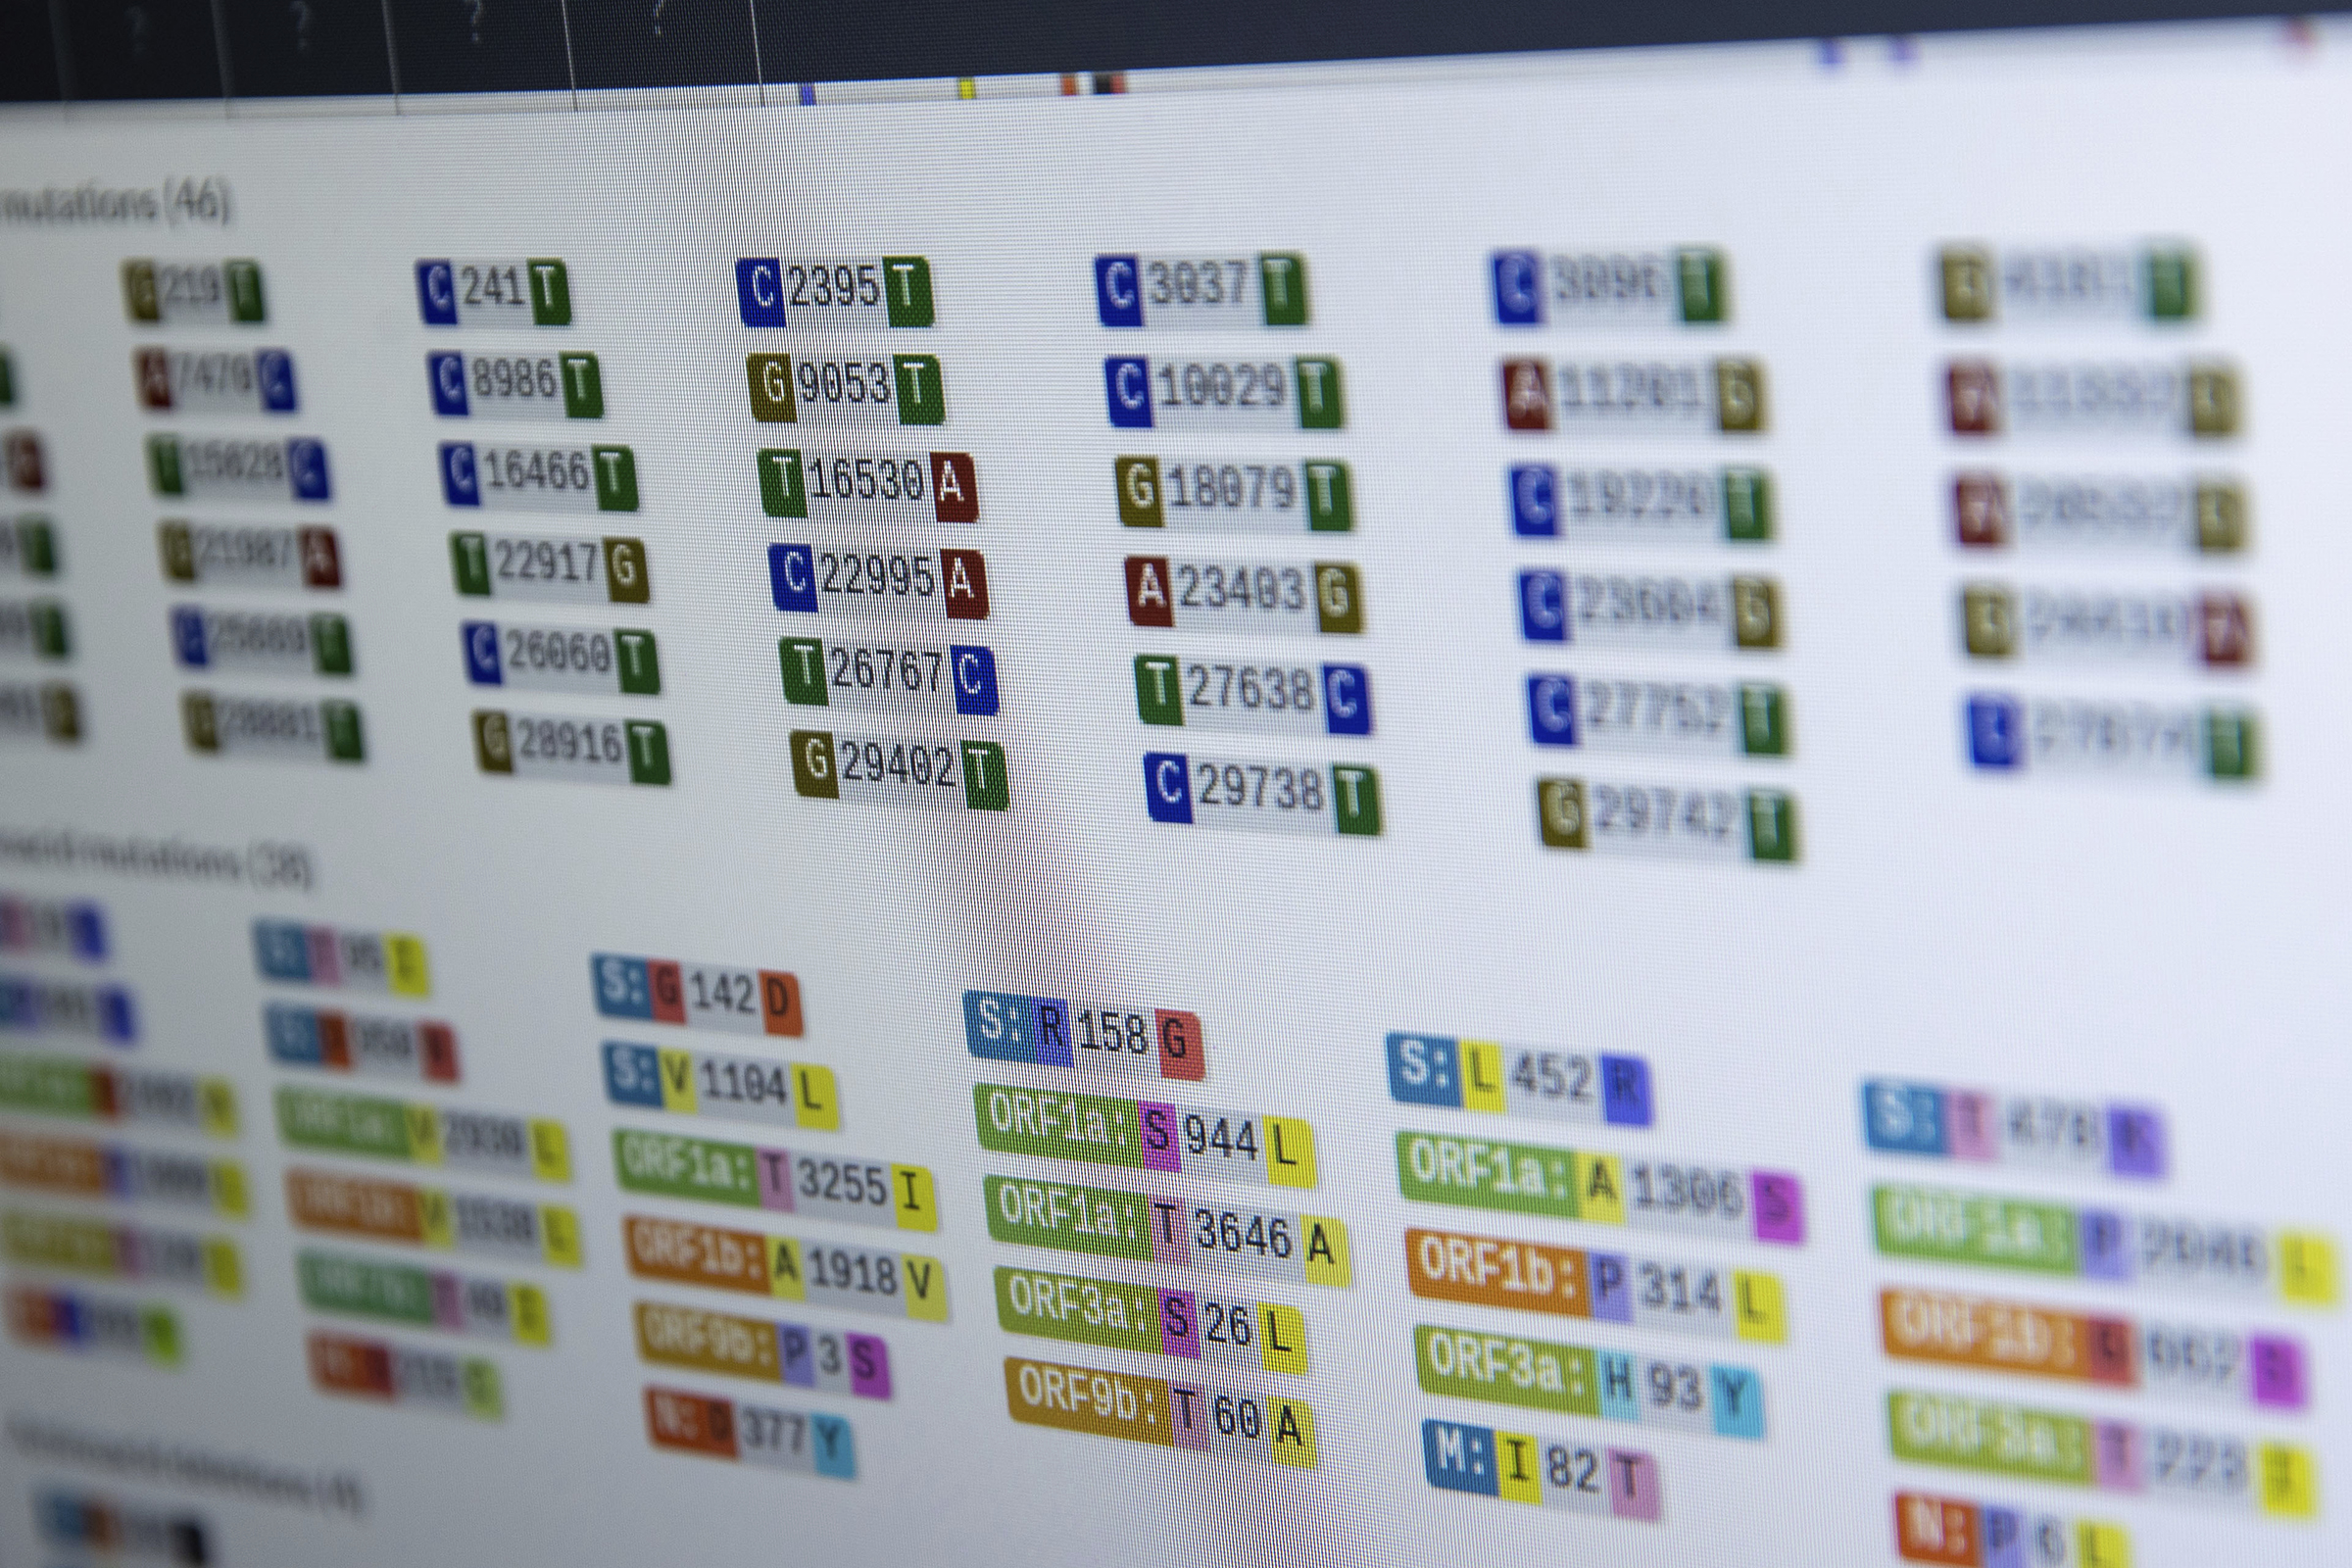 Different variants and mutations of the corona virus are graphically displayed on a computer monitor in the sequencing laboratory for corona variants (CoMV gene) at Greifswald University Medical Center. Corona viruses are constantly changing and need to be monitored by elaborate genetic analyses. In Greifswald, researchers are working at full capacity and have sequenced more than 1,500 samples in recent weeks. (Jens B'ttner–Picture Alliance/DPA/AP)